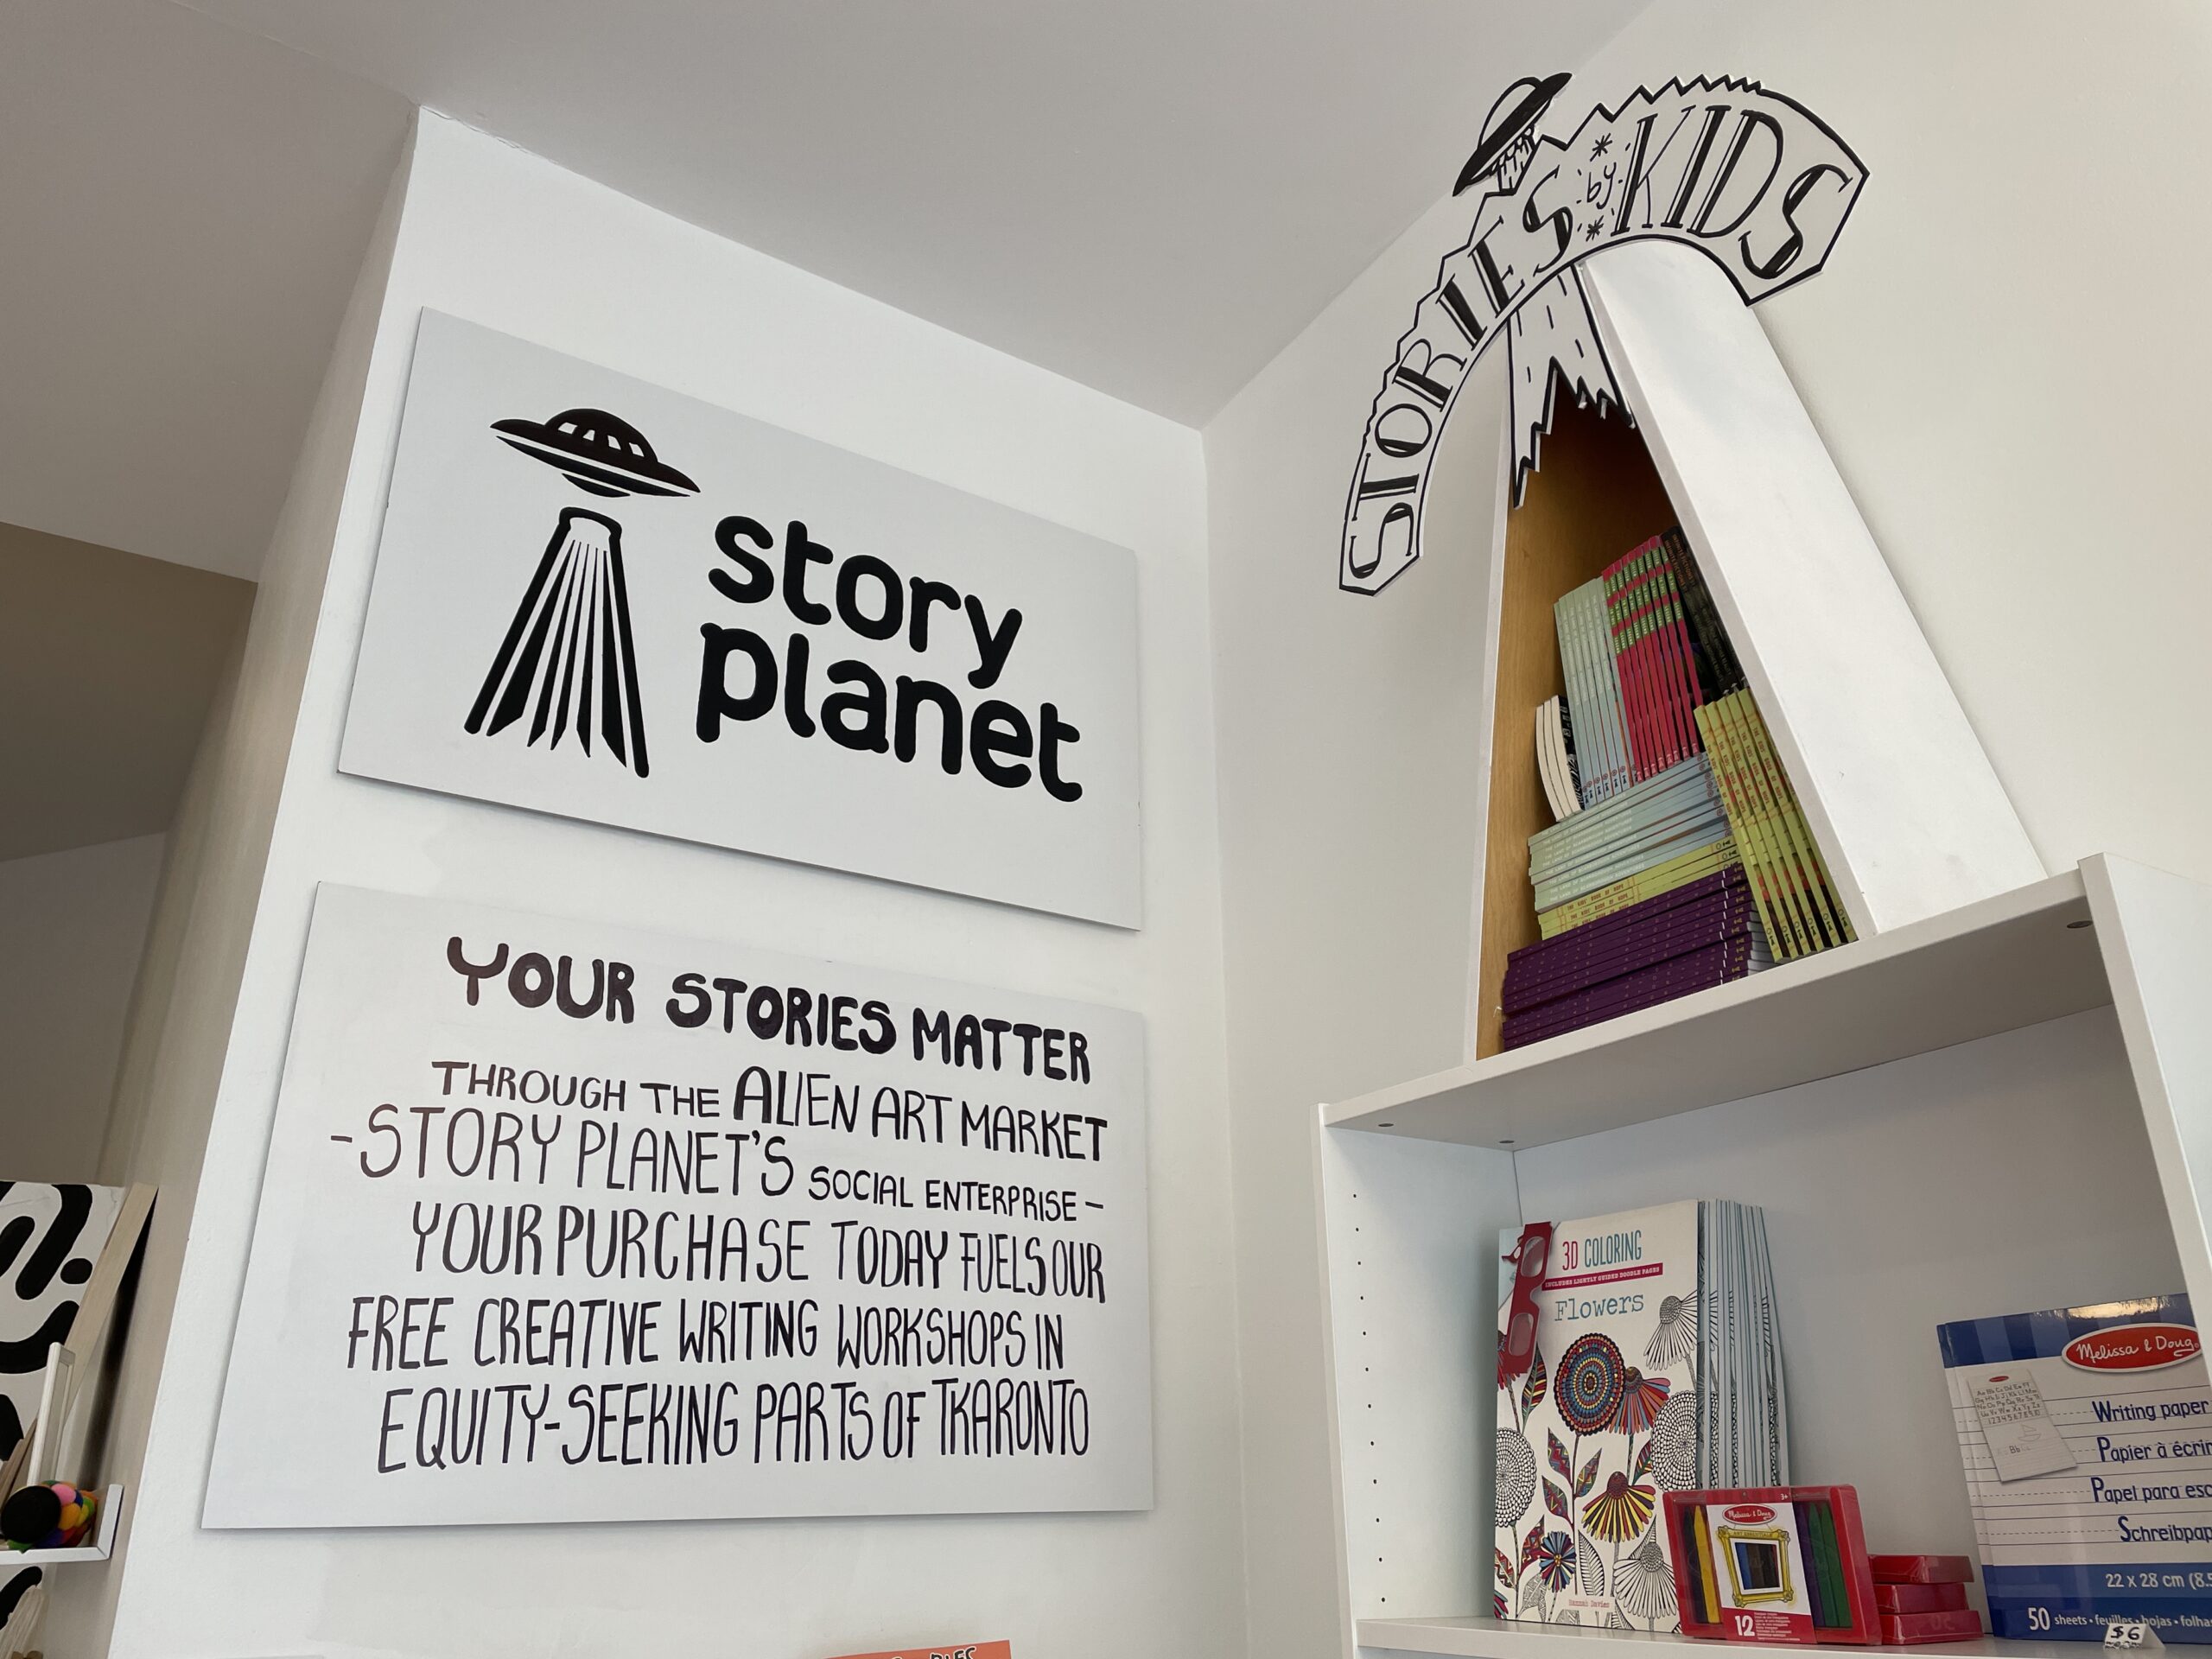 A wall in Alien Art Market with two signs. The first features the logo of Story Planet, which is a UFO next to the words 'Story Planet.' The second sign reads: "Your stories matter. Through the Alien Art Market - Story Planet's social enterprise - your purchase today fuels our free creative writing workshops in equity-seeking parts of Tkaronto."